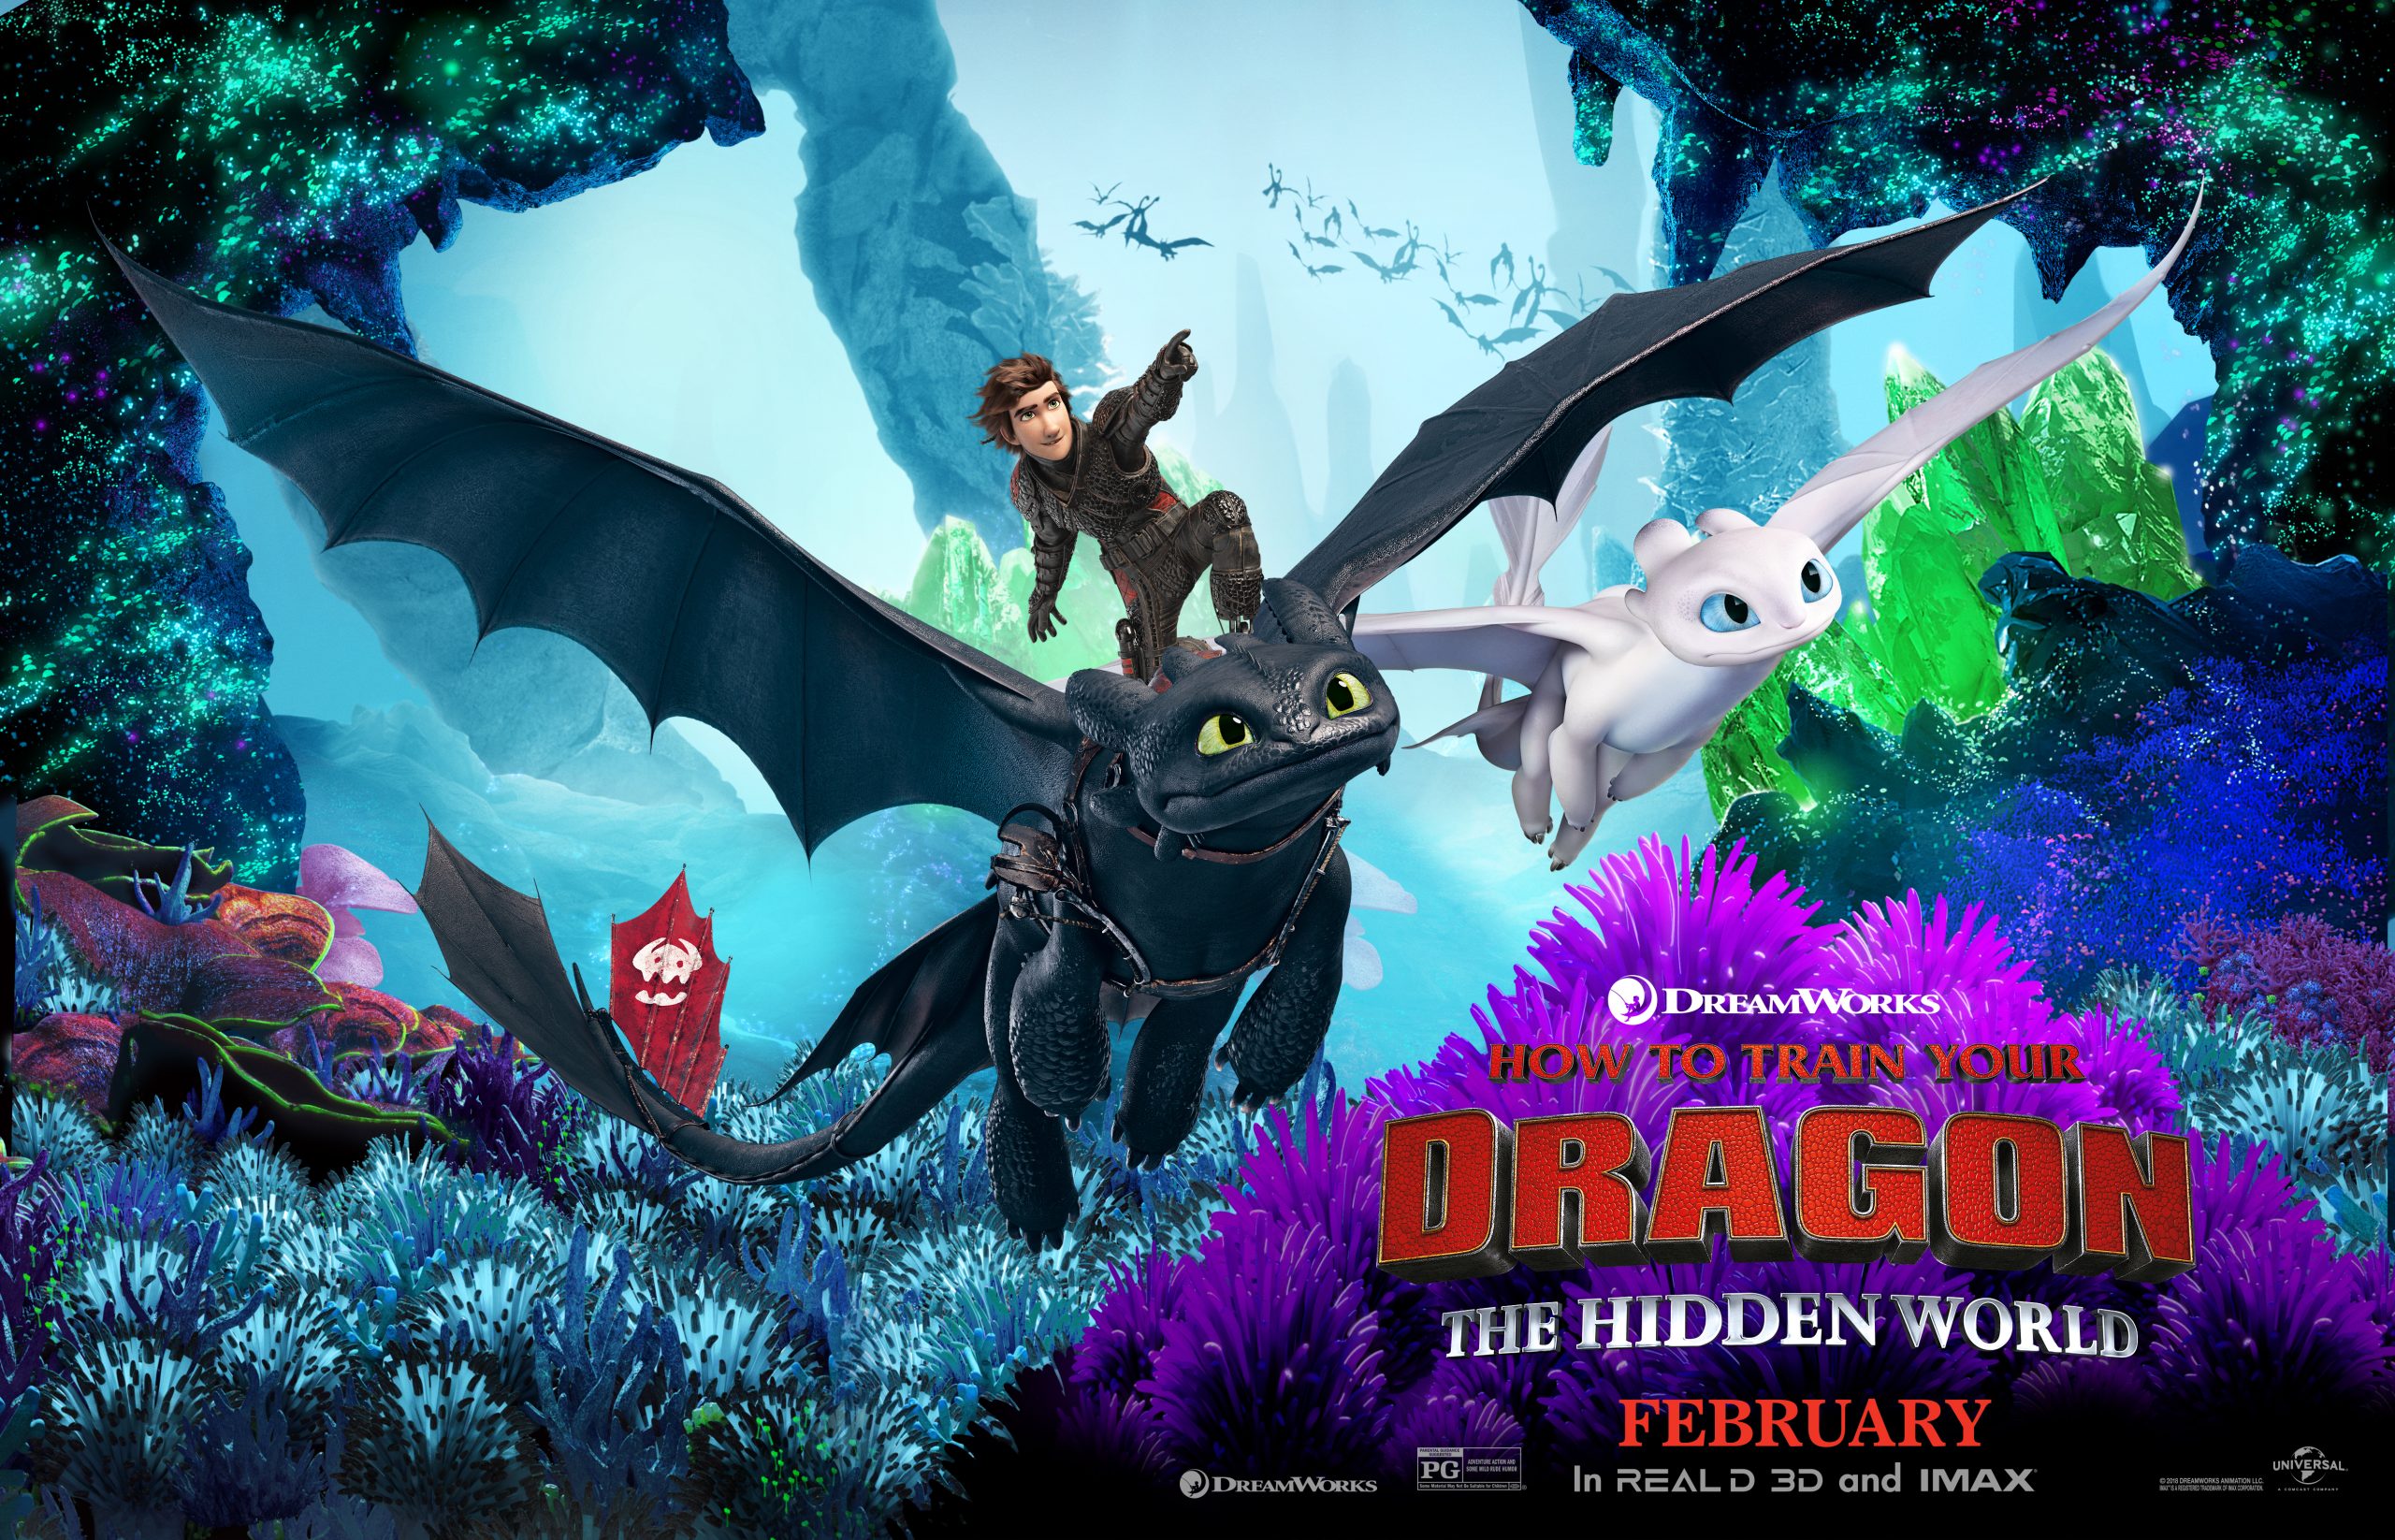 The Making of How to Train Your Dragon 3 and Printable Party Kit